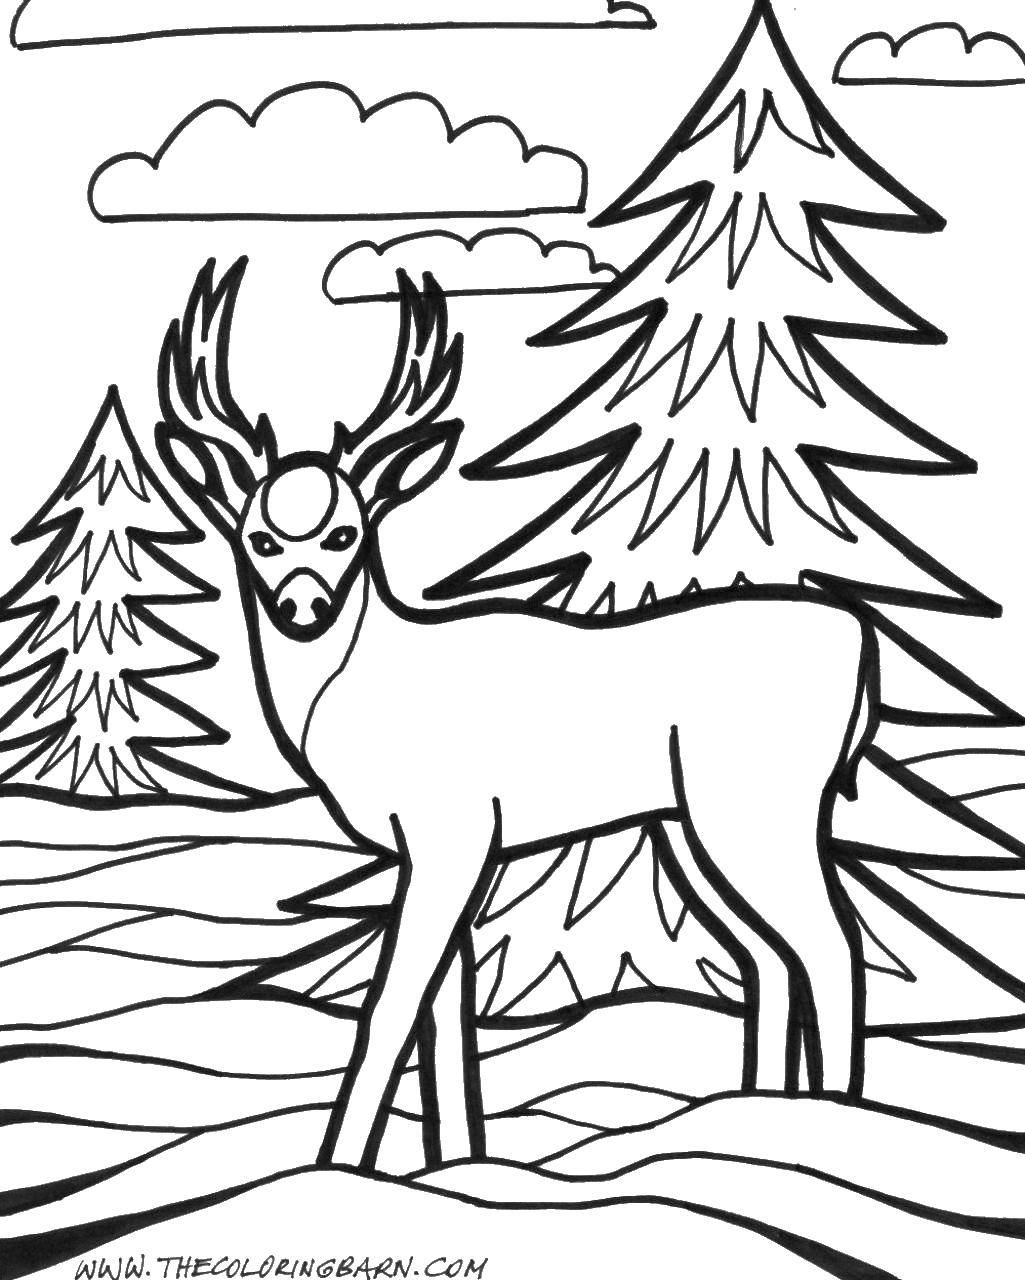 Coloring The deer among the trees. Category the forest. Tags:  Animals, deer.